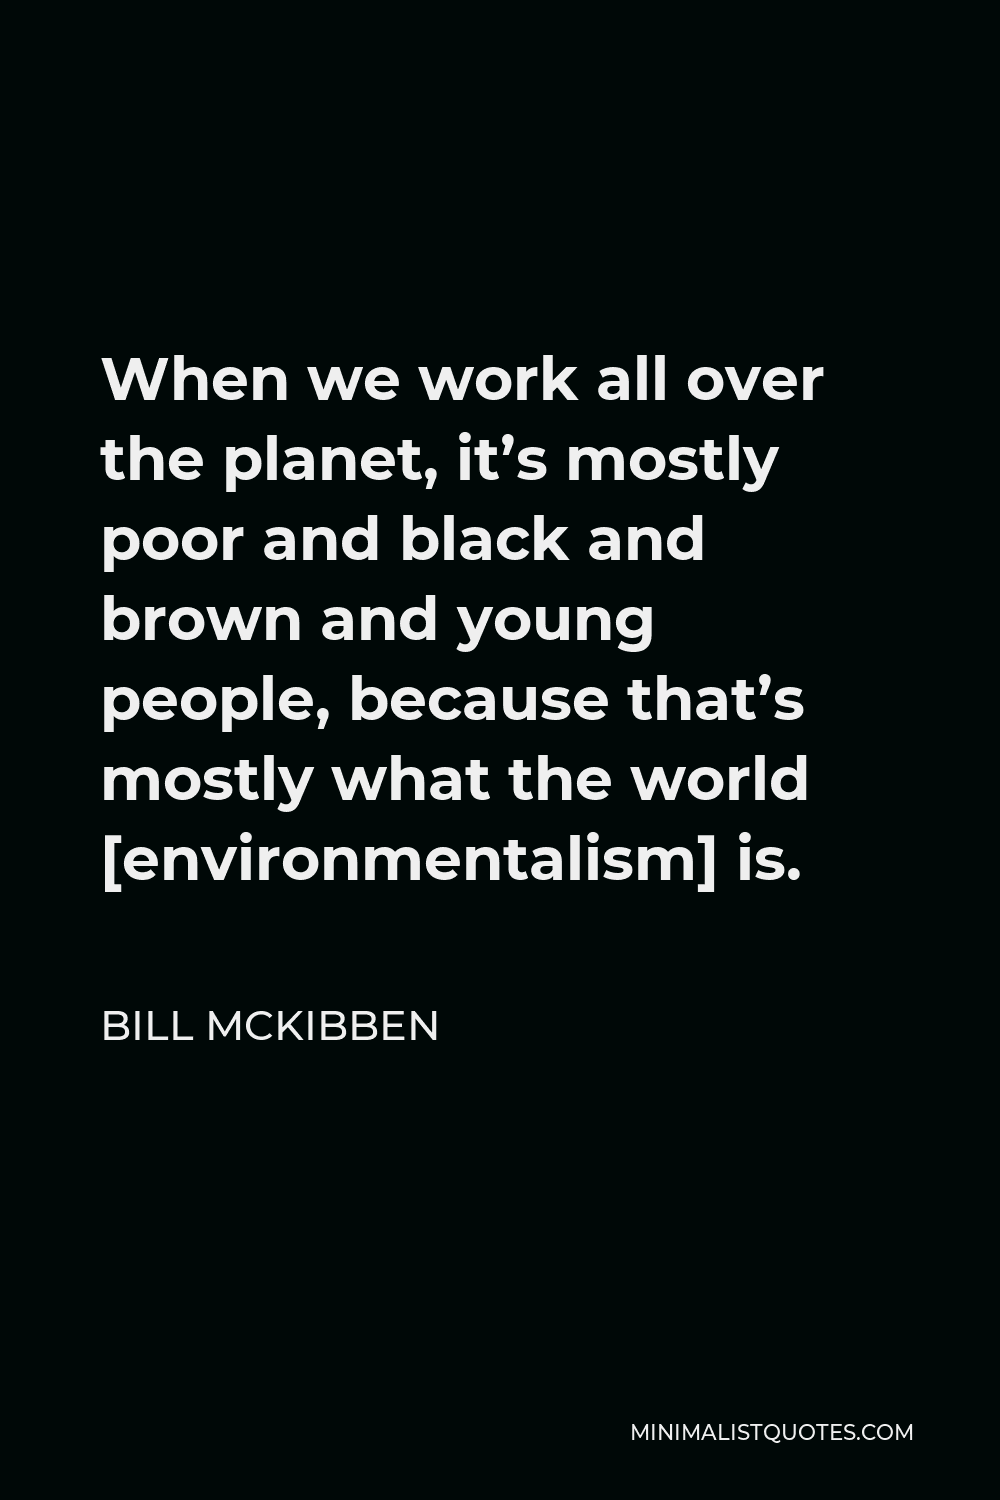 Bill McKibben Quote - When we work all over the planet, it’s mostly poor and black and brown and young people, because that’s mostly what the world [environmentalism] is.